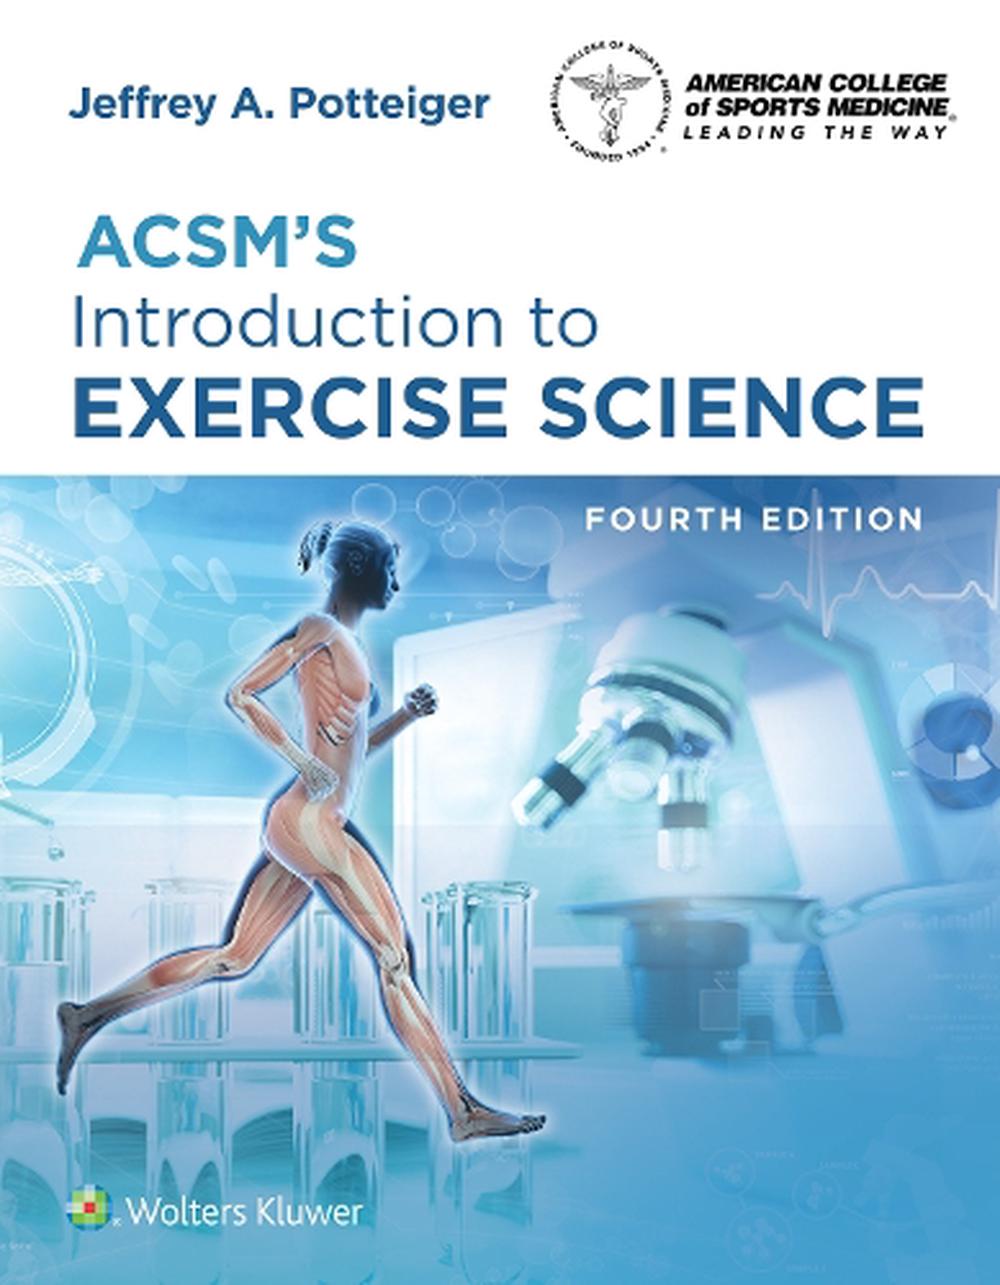 exercise science literature review topics